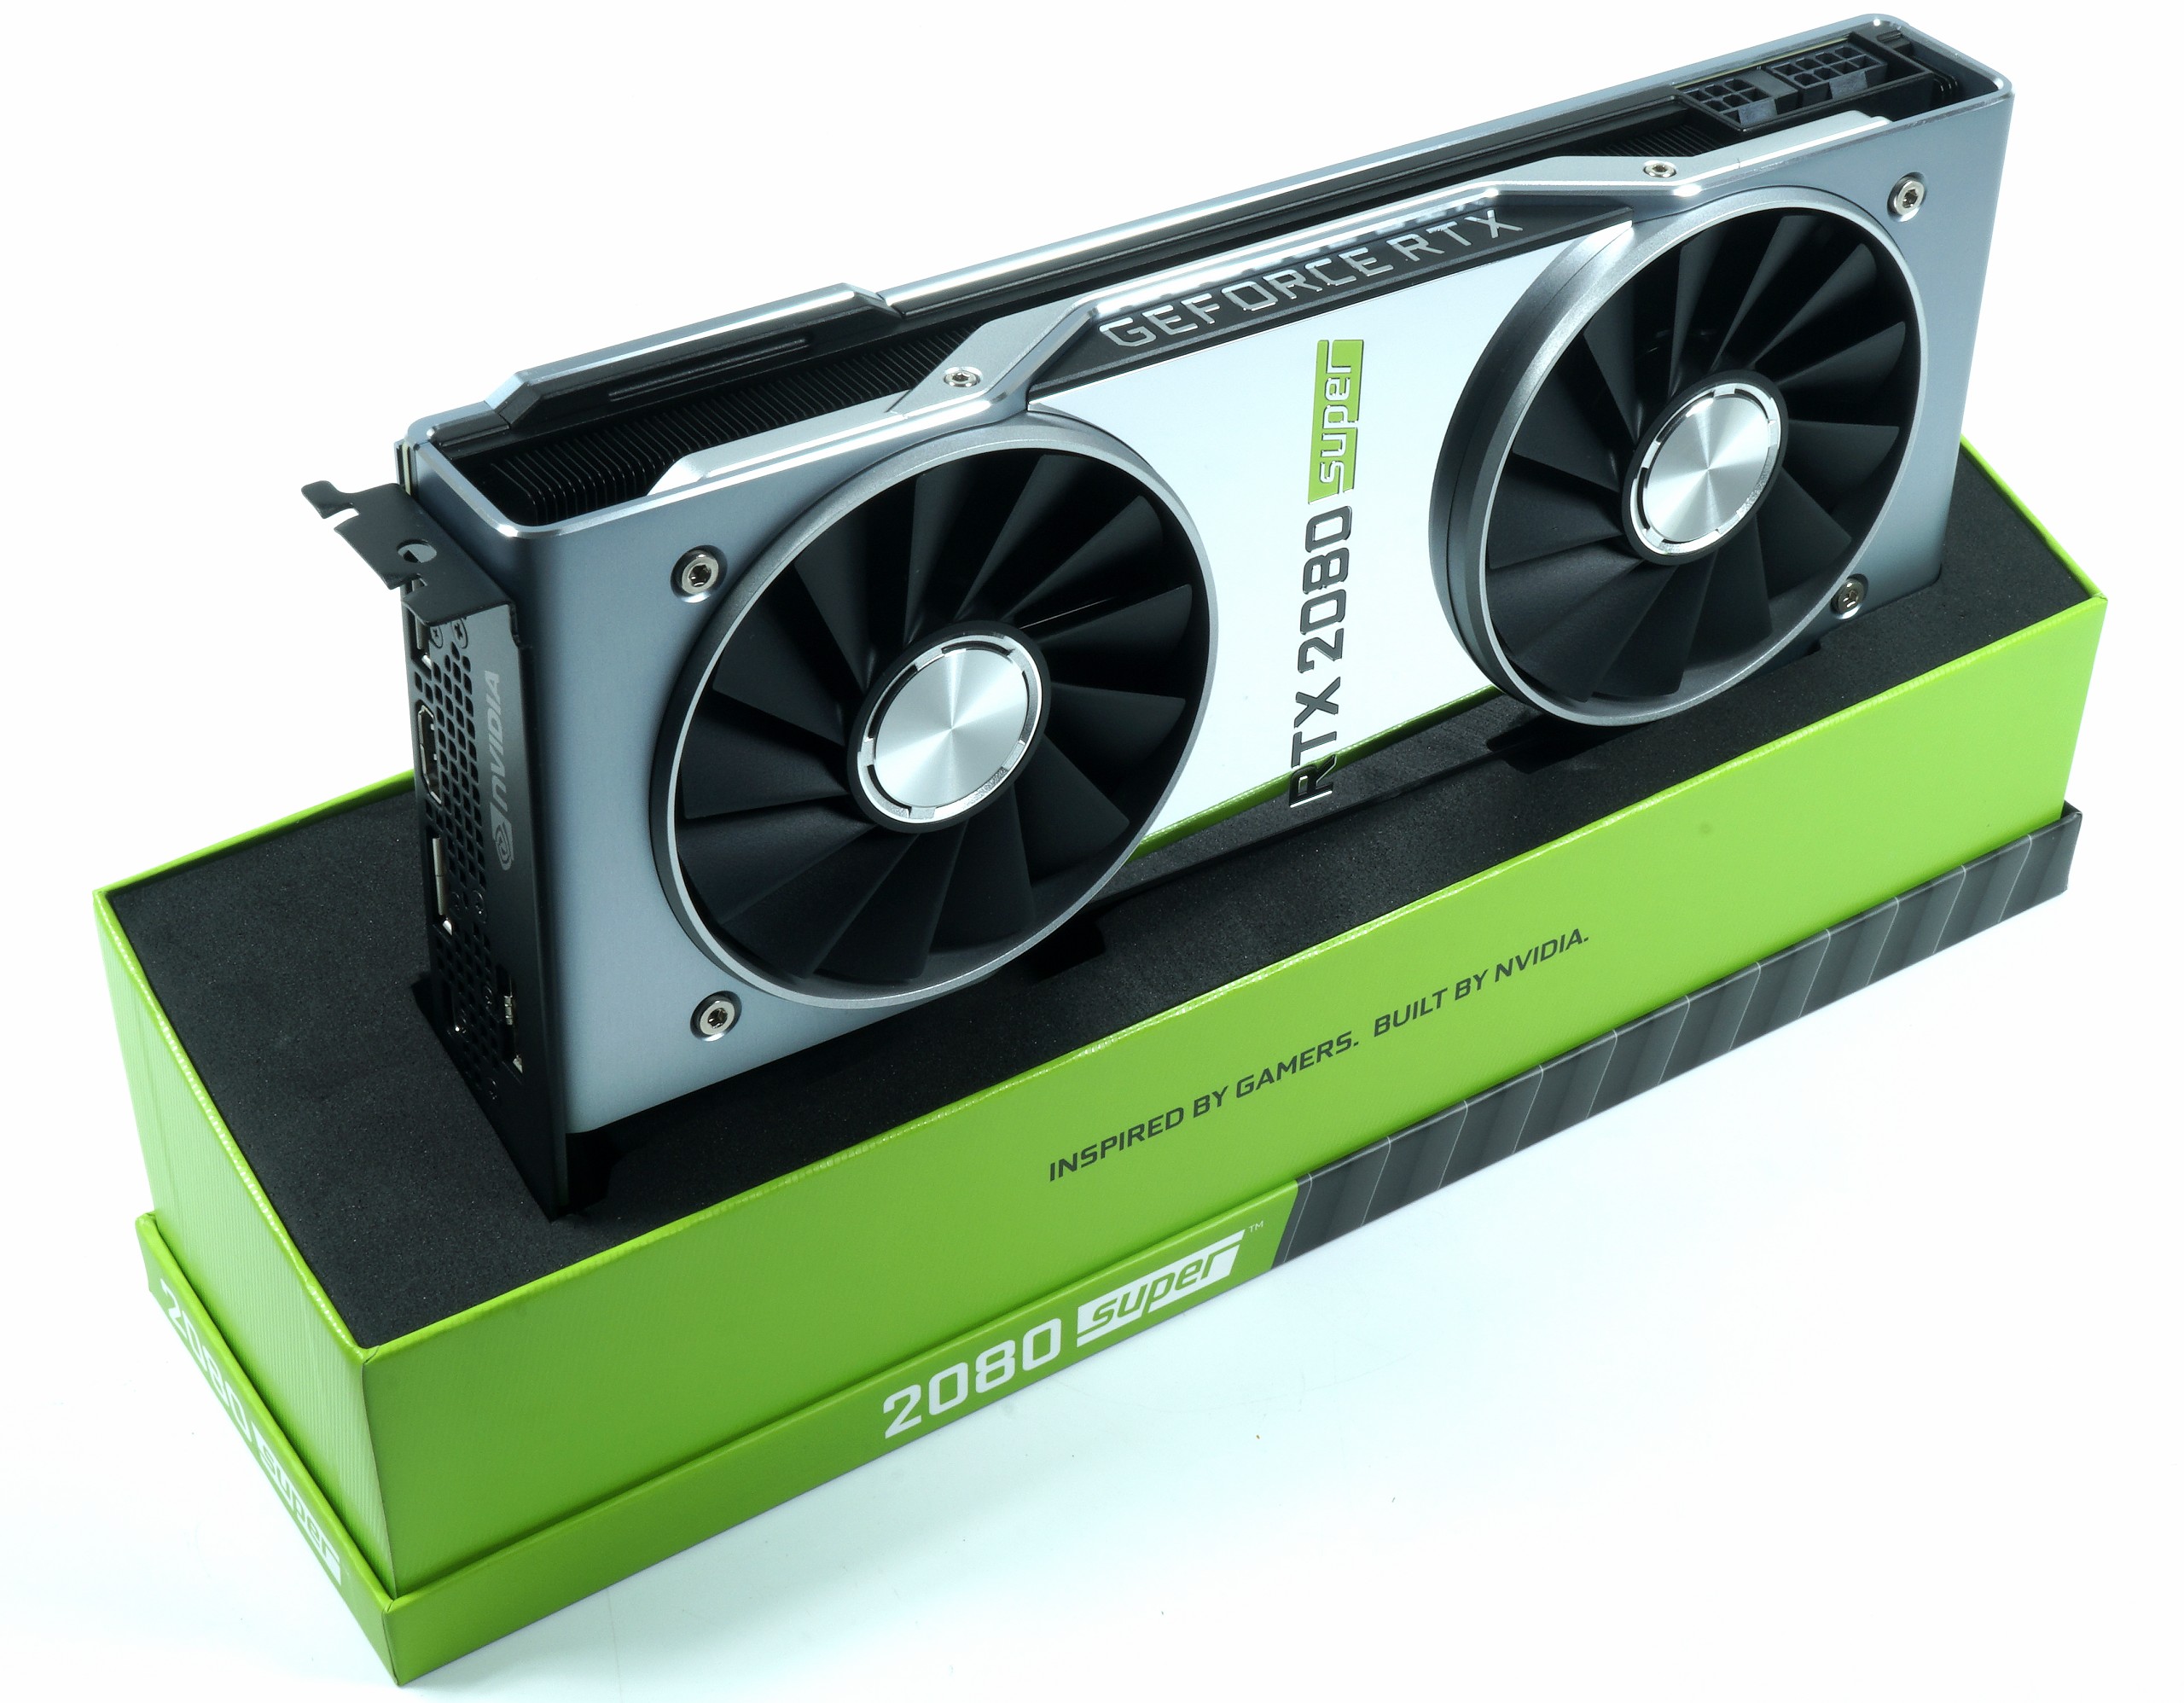 Nvidia GeForce RTX 2080 Super review - Real upgrade, small update or just a  side kick?